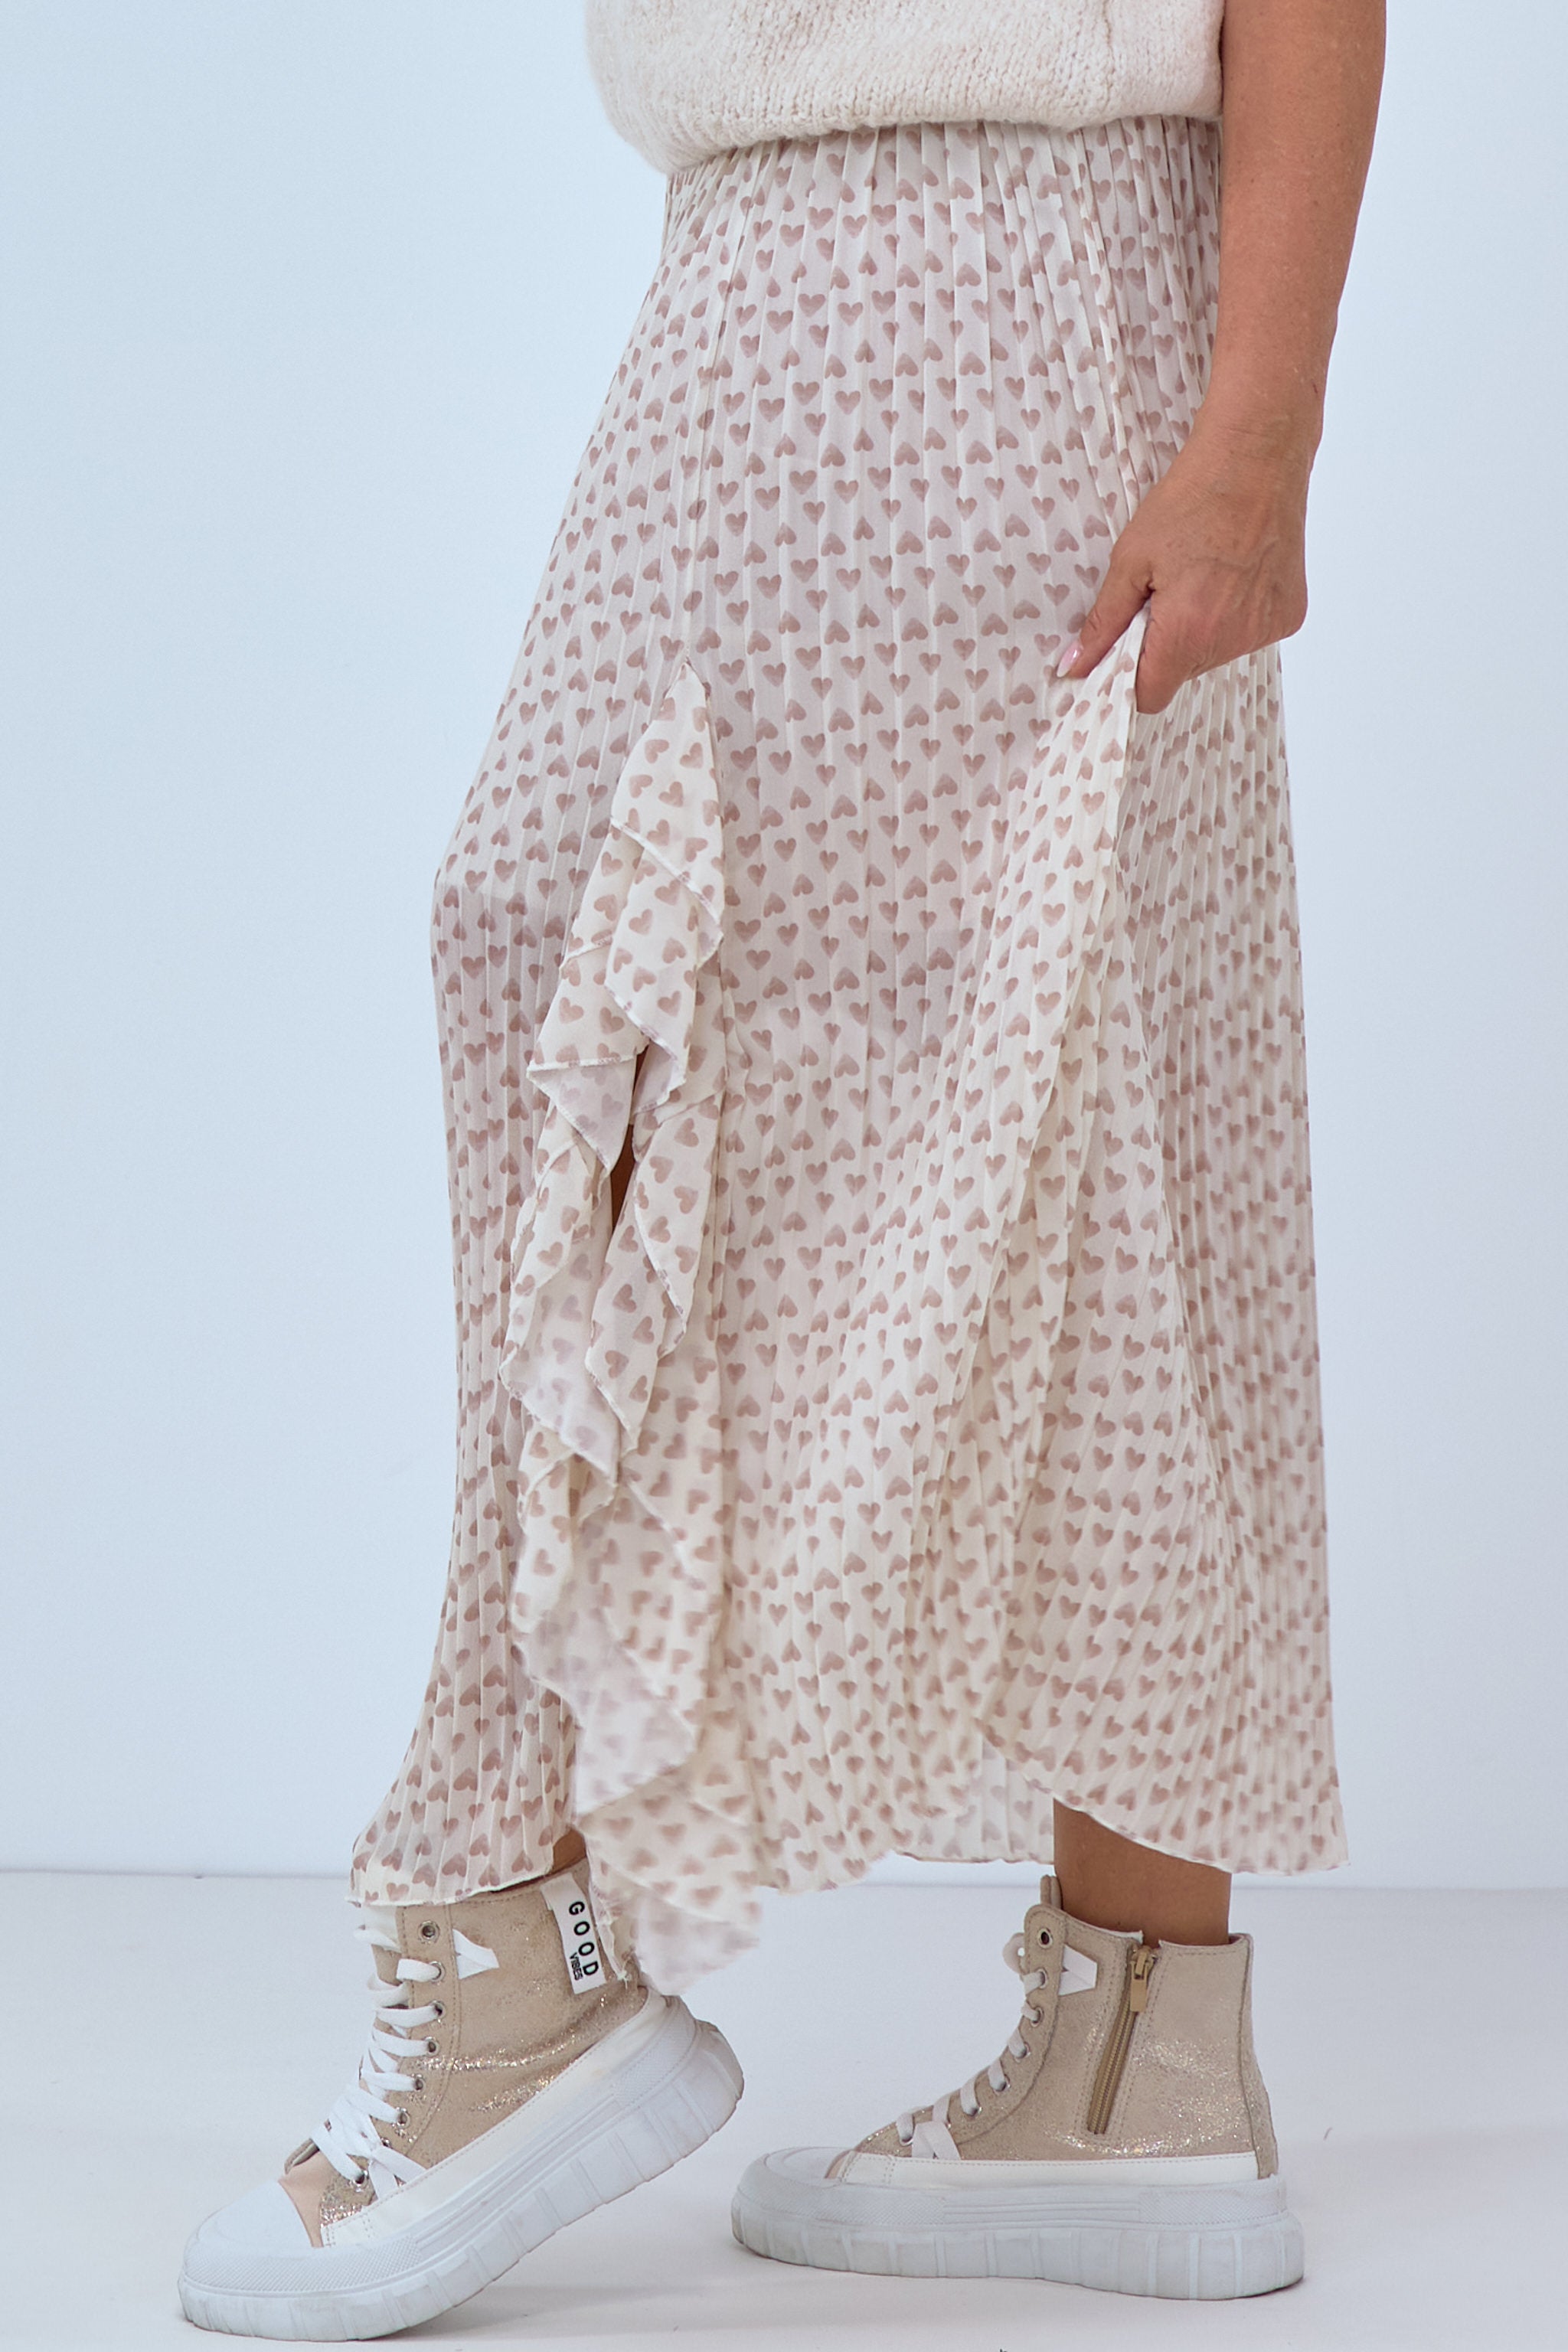 Slit pleated skirt with hearts, cream-beige